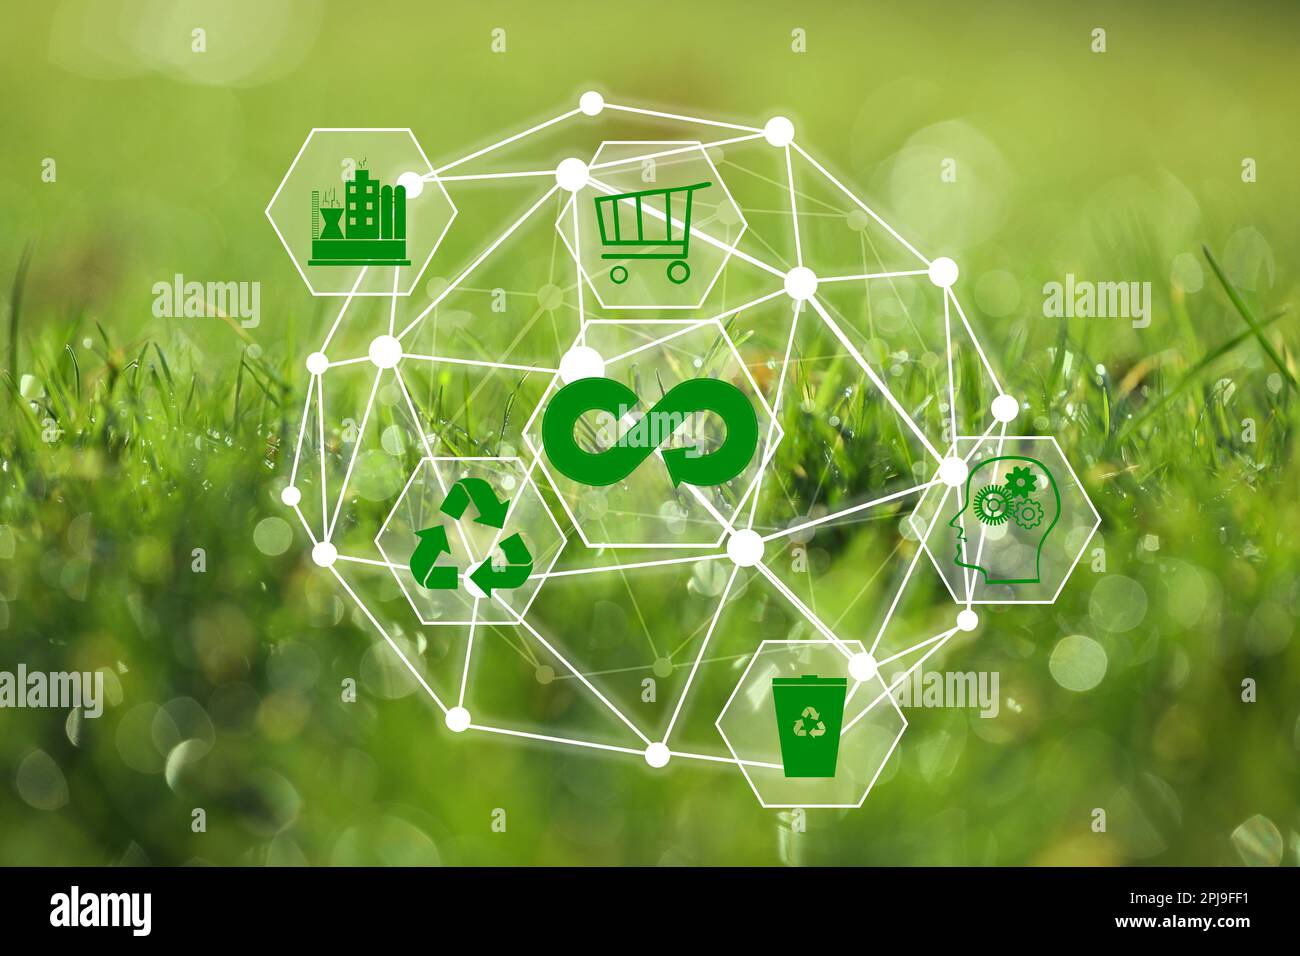 Circular economy concept. Green grass and illustration of infinity symbol and different icons Stock Photo